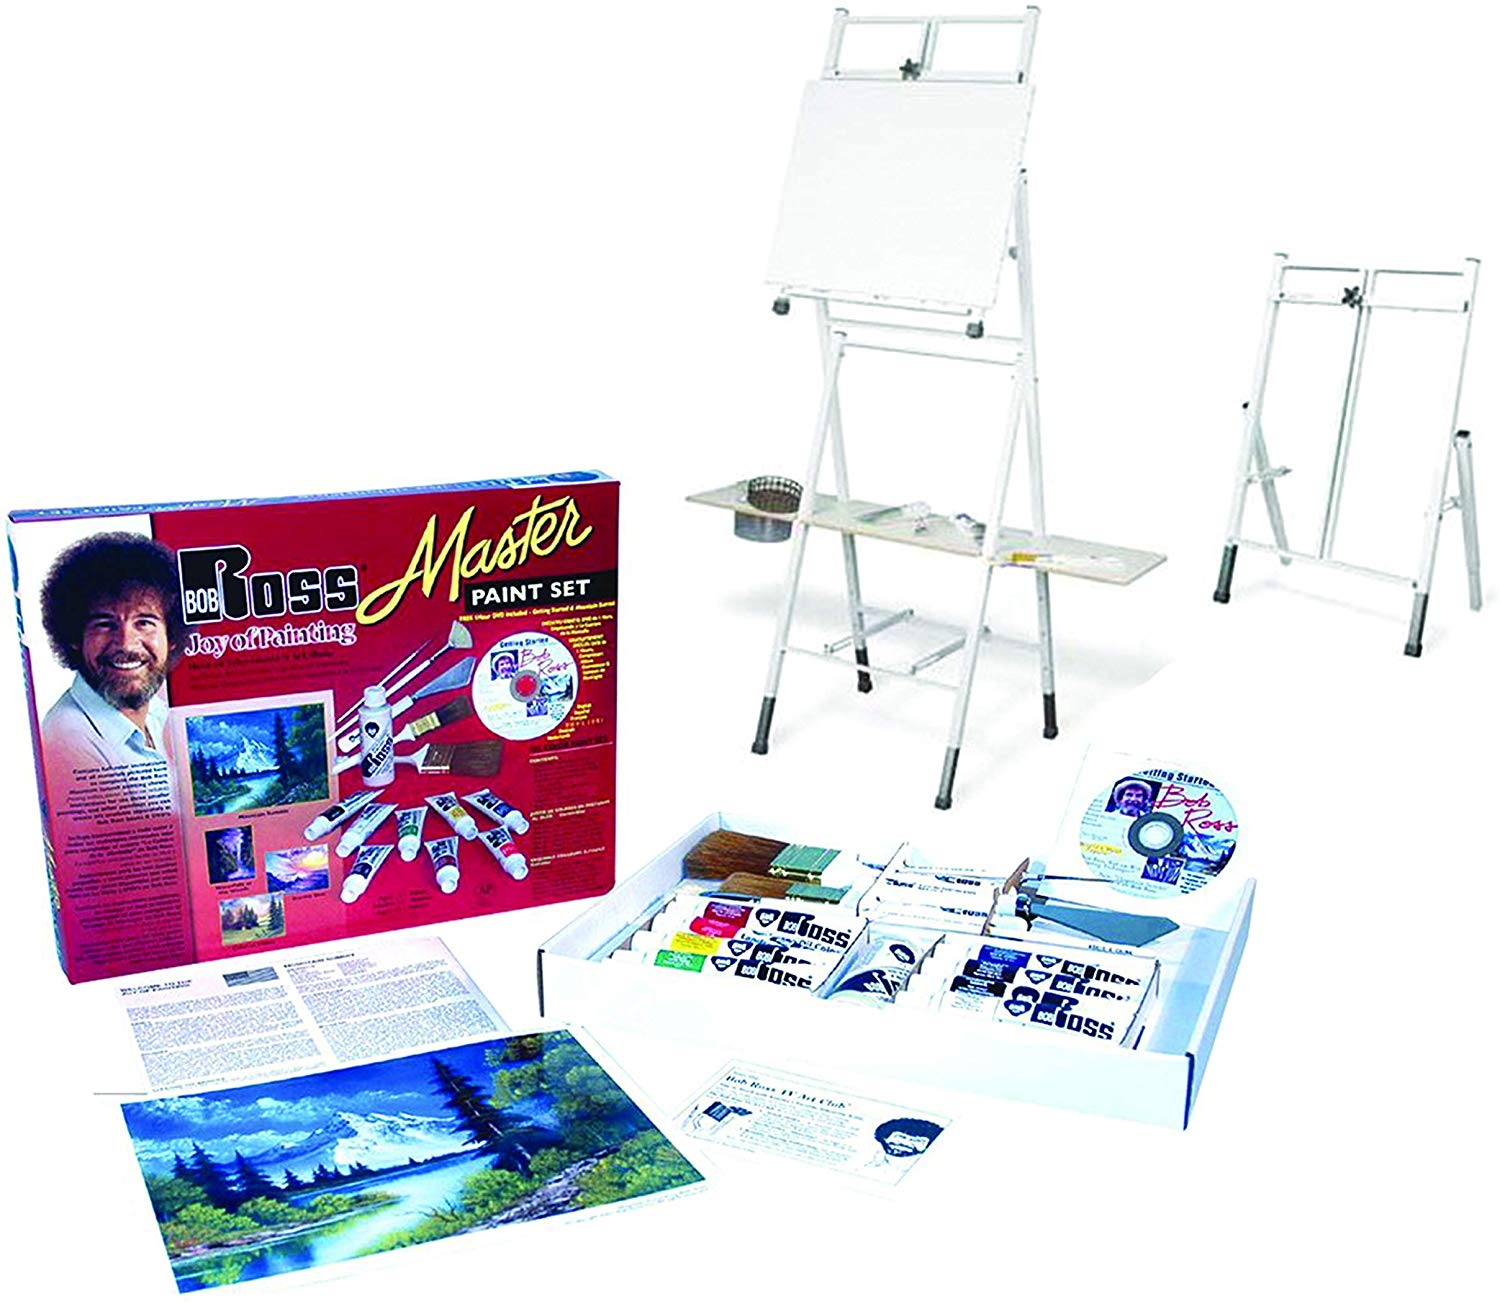 Bob the Legend with Easel and Canvas - BlockMasters Shop